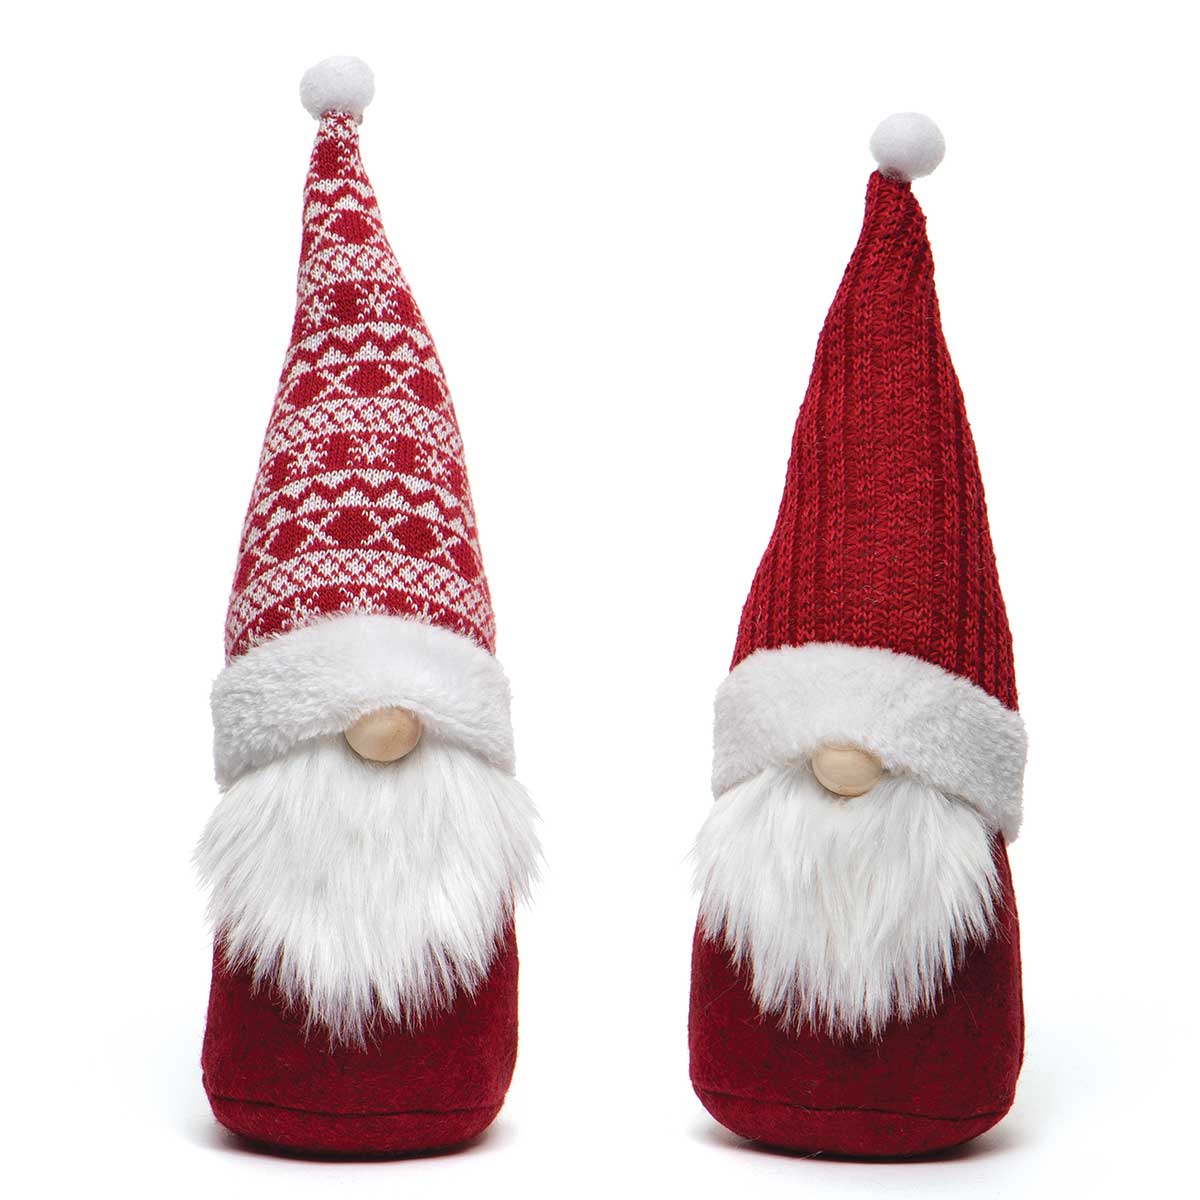 Holiday Gnome Red/White with Red/Pattern Sweater Hat Set of 2